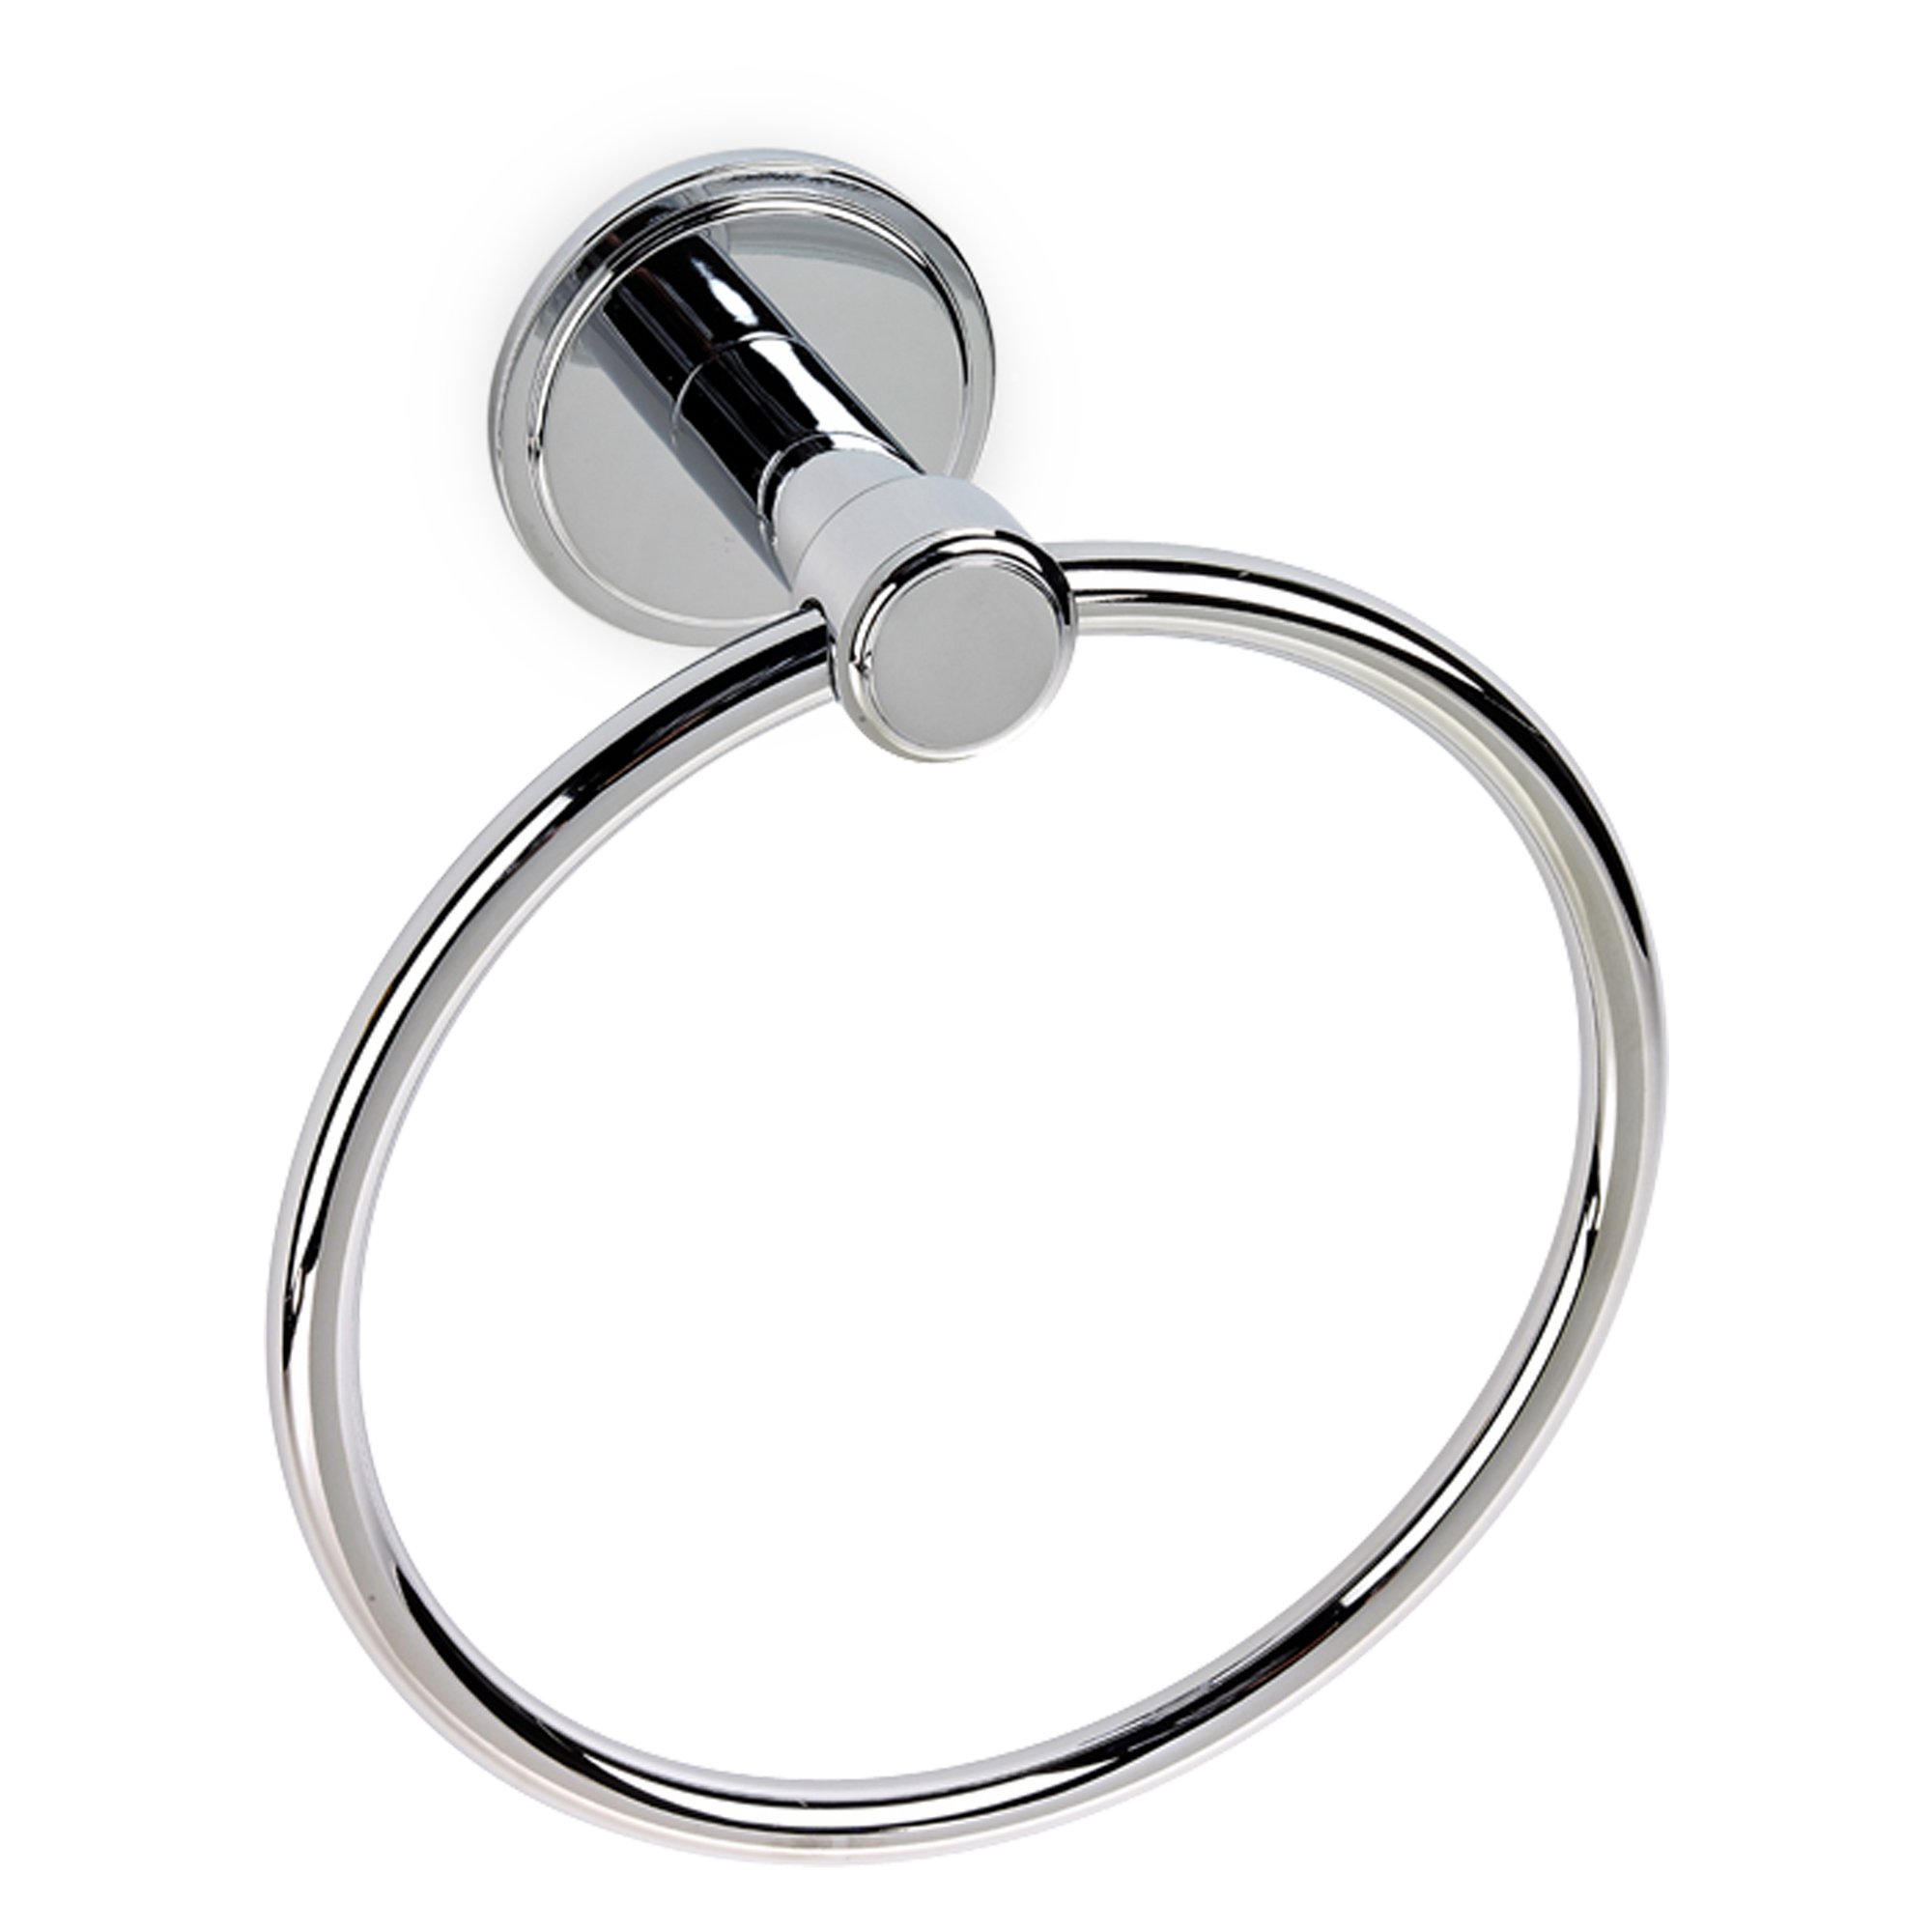 The Harrow Towel Ring features a streamlined look inspired by the art deco movment.